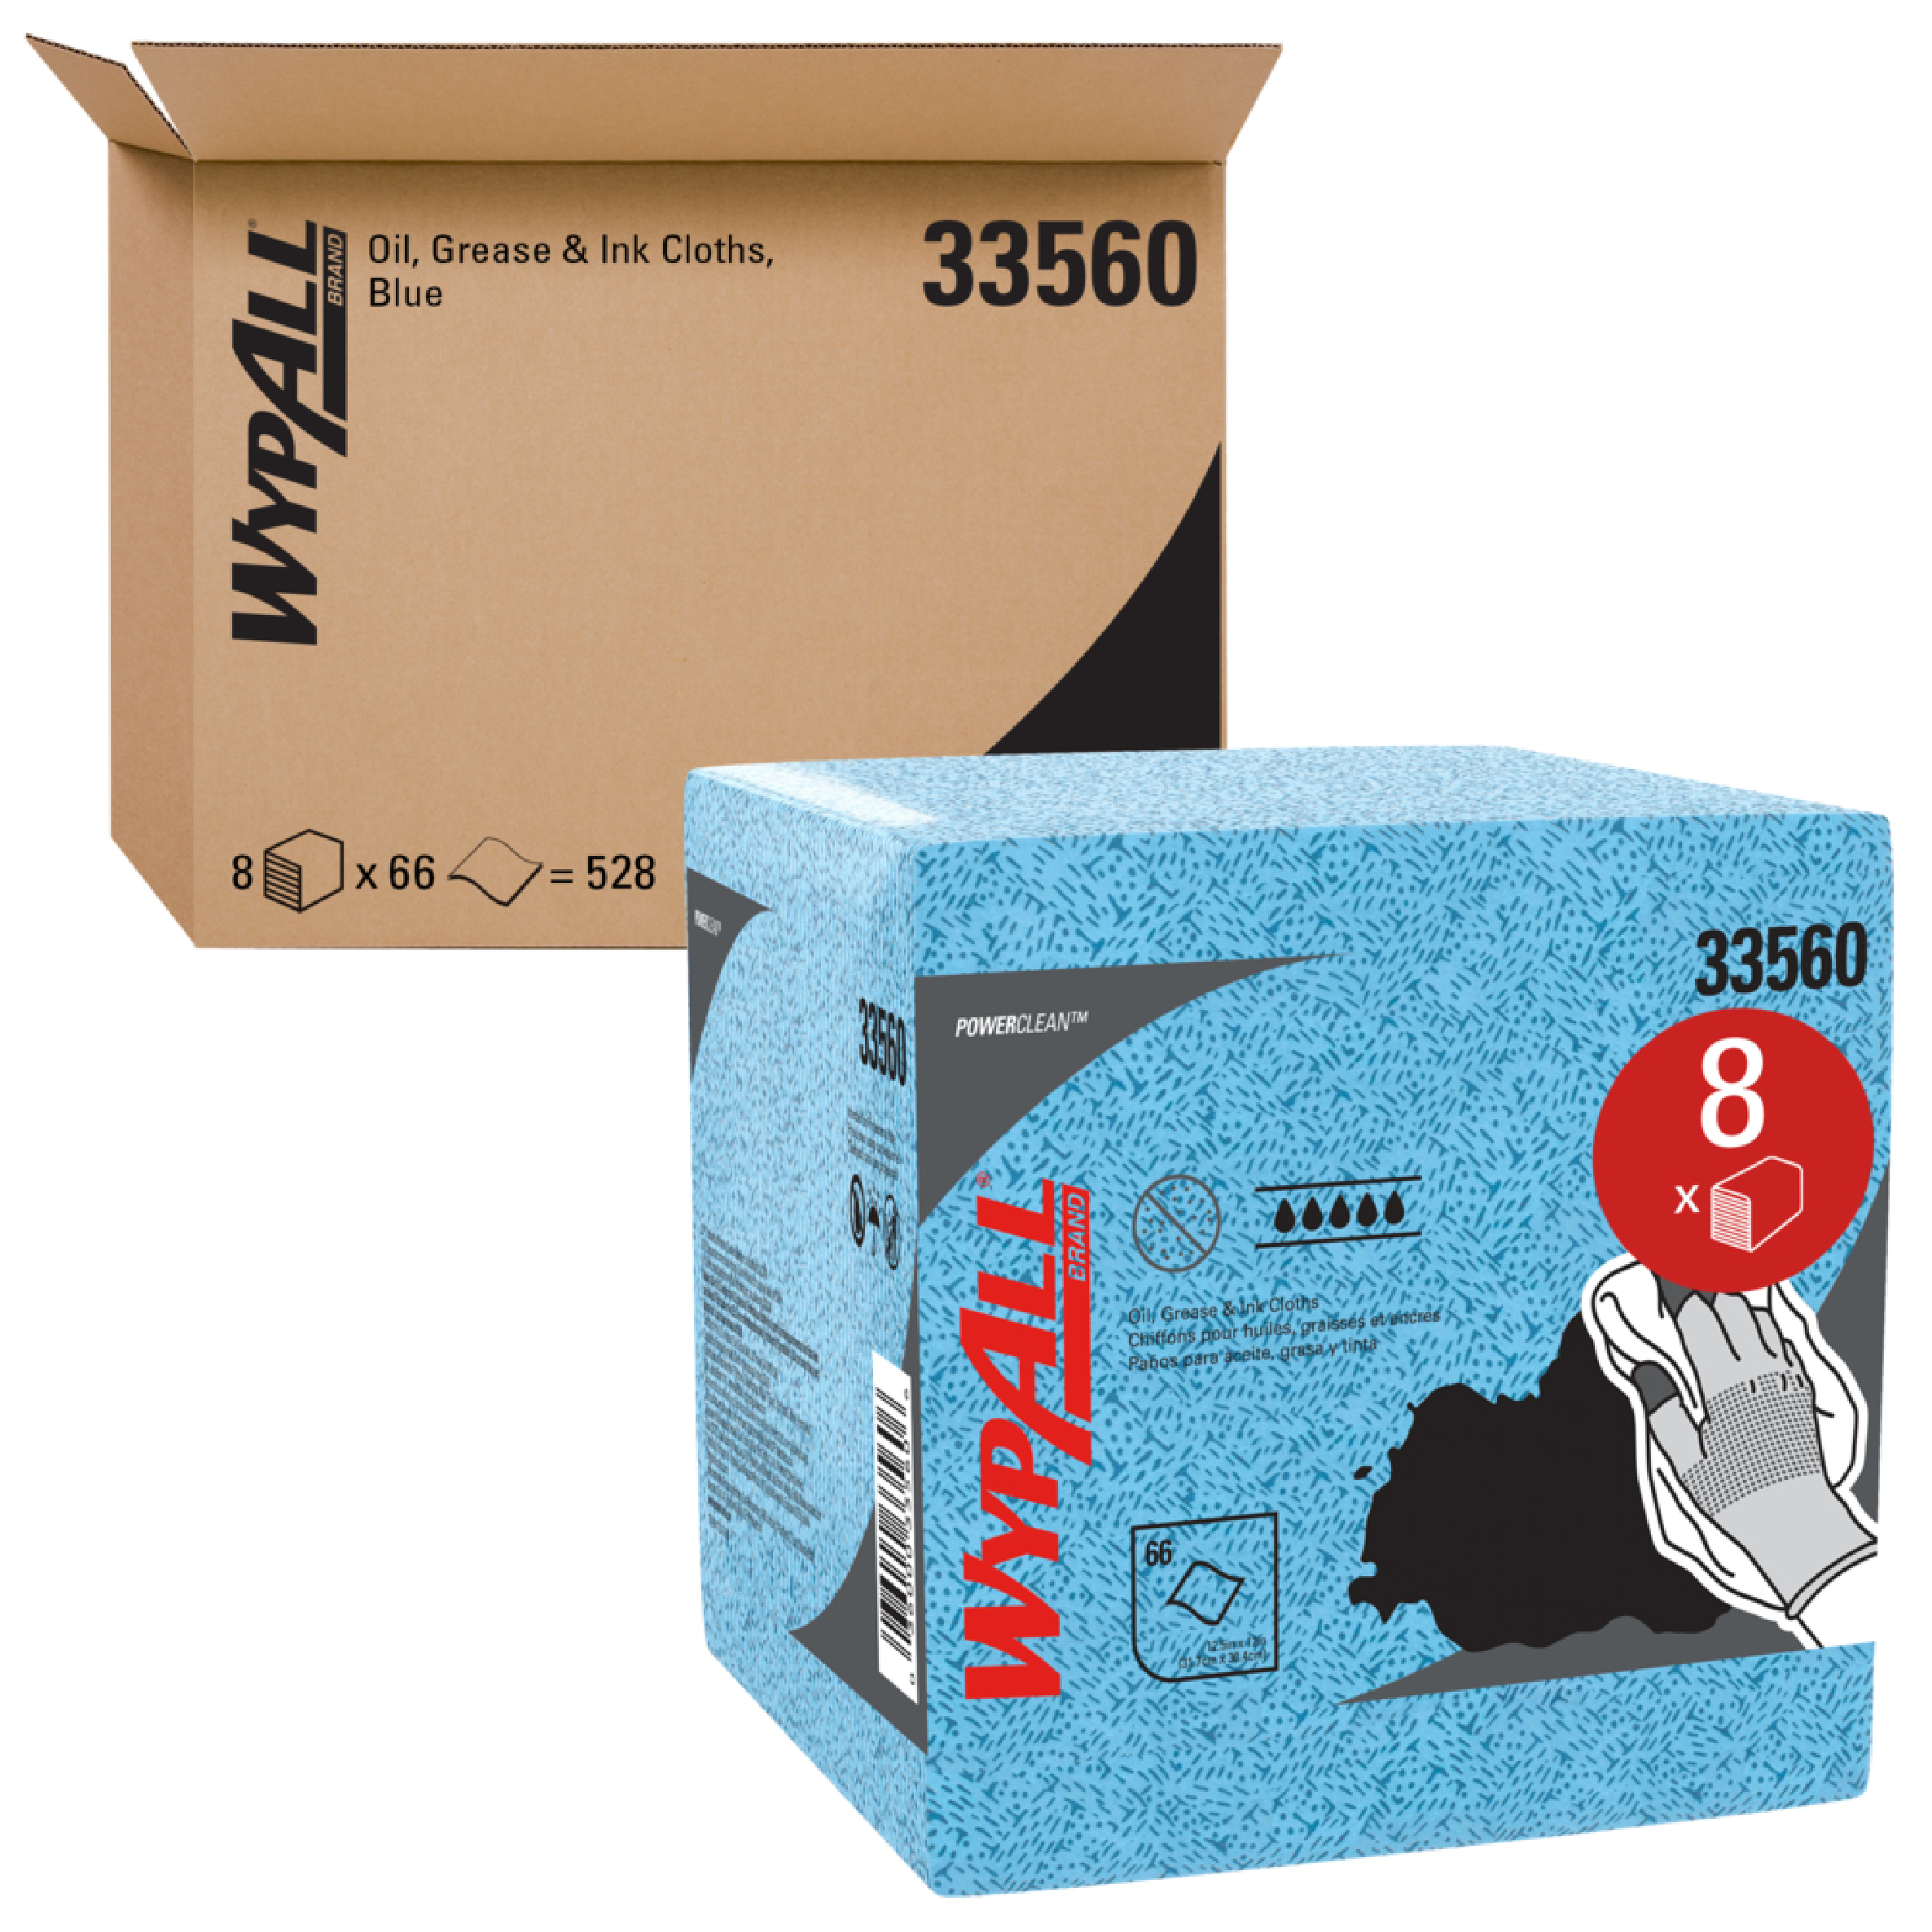 Kimberly Clark WYPALL OIL, GREASE & INK CLOTH 88 PACKS X 66PC KCP33560